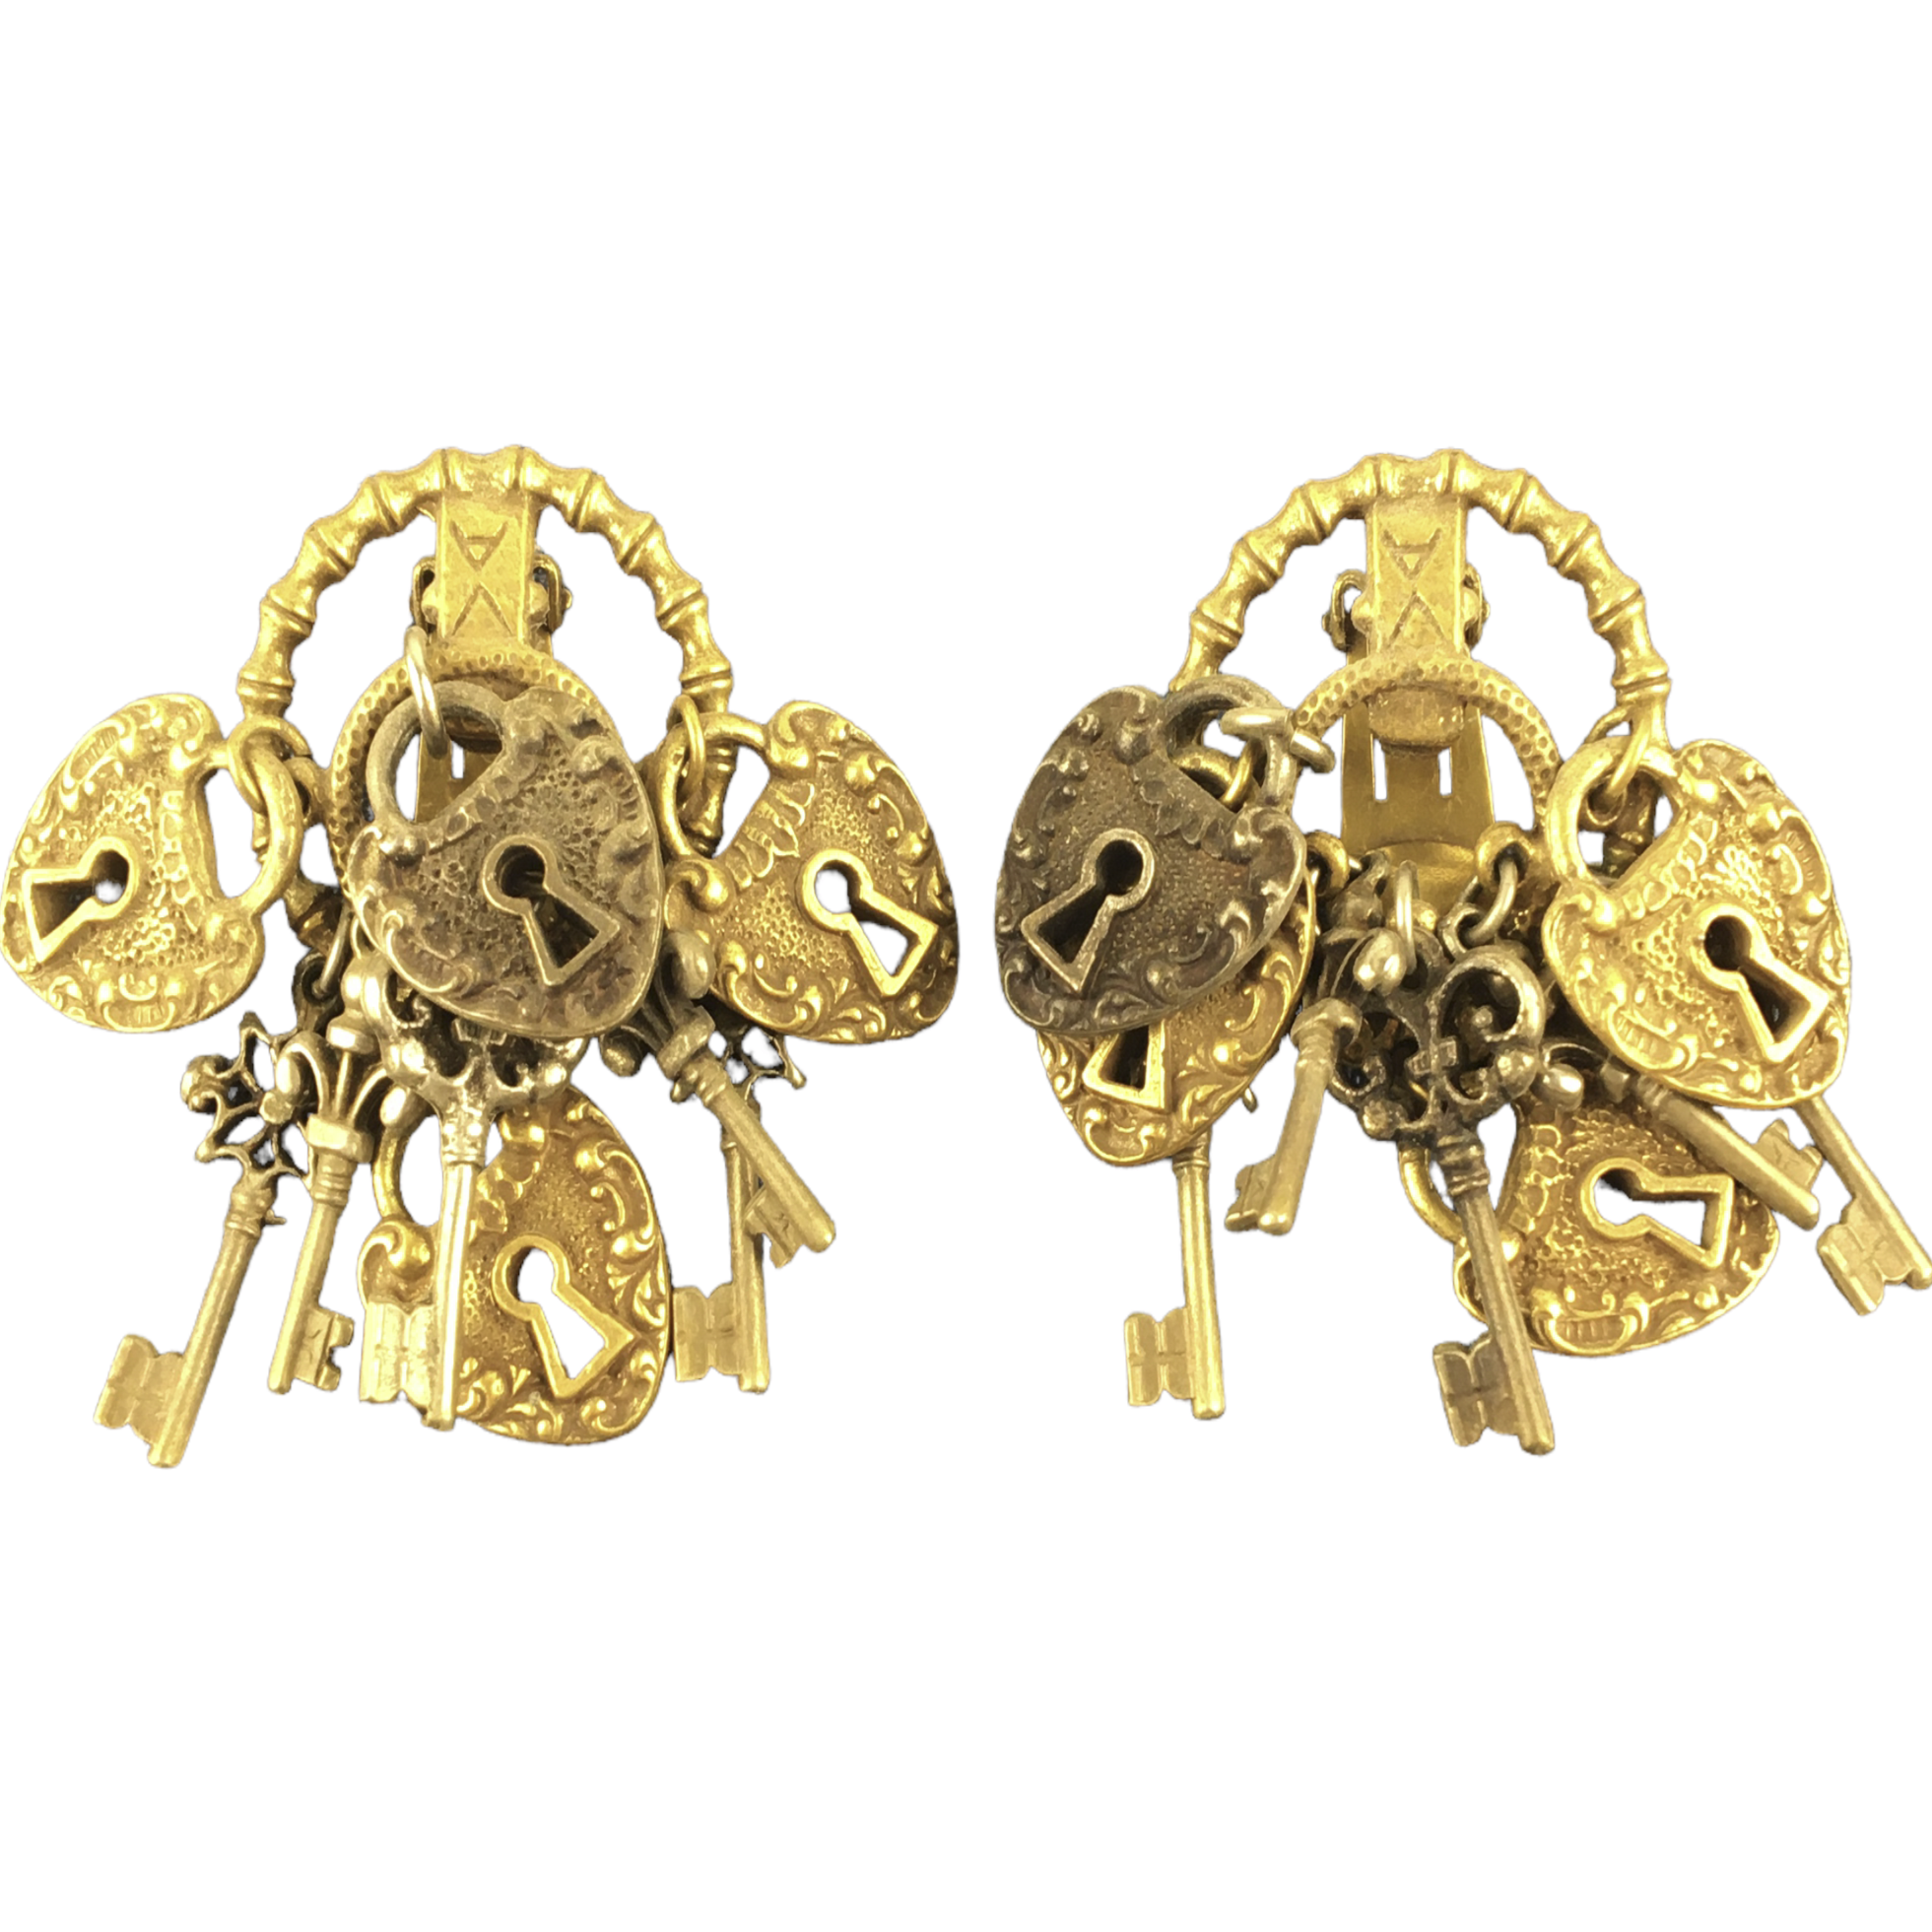 Chunky Lock and Key Charms Clip on Earrings